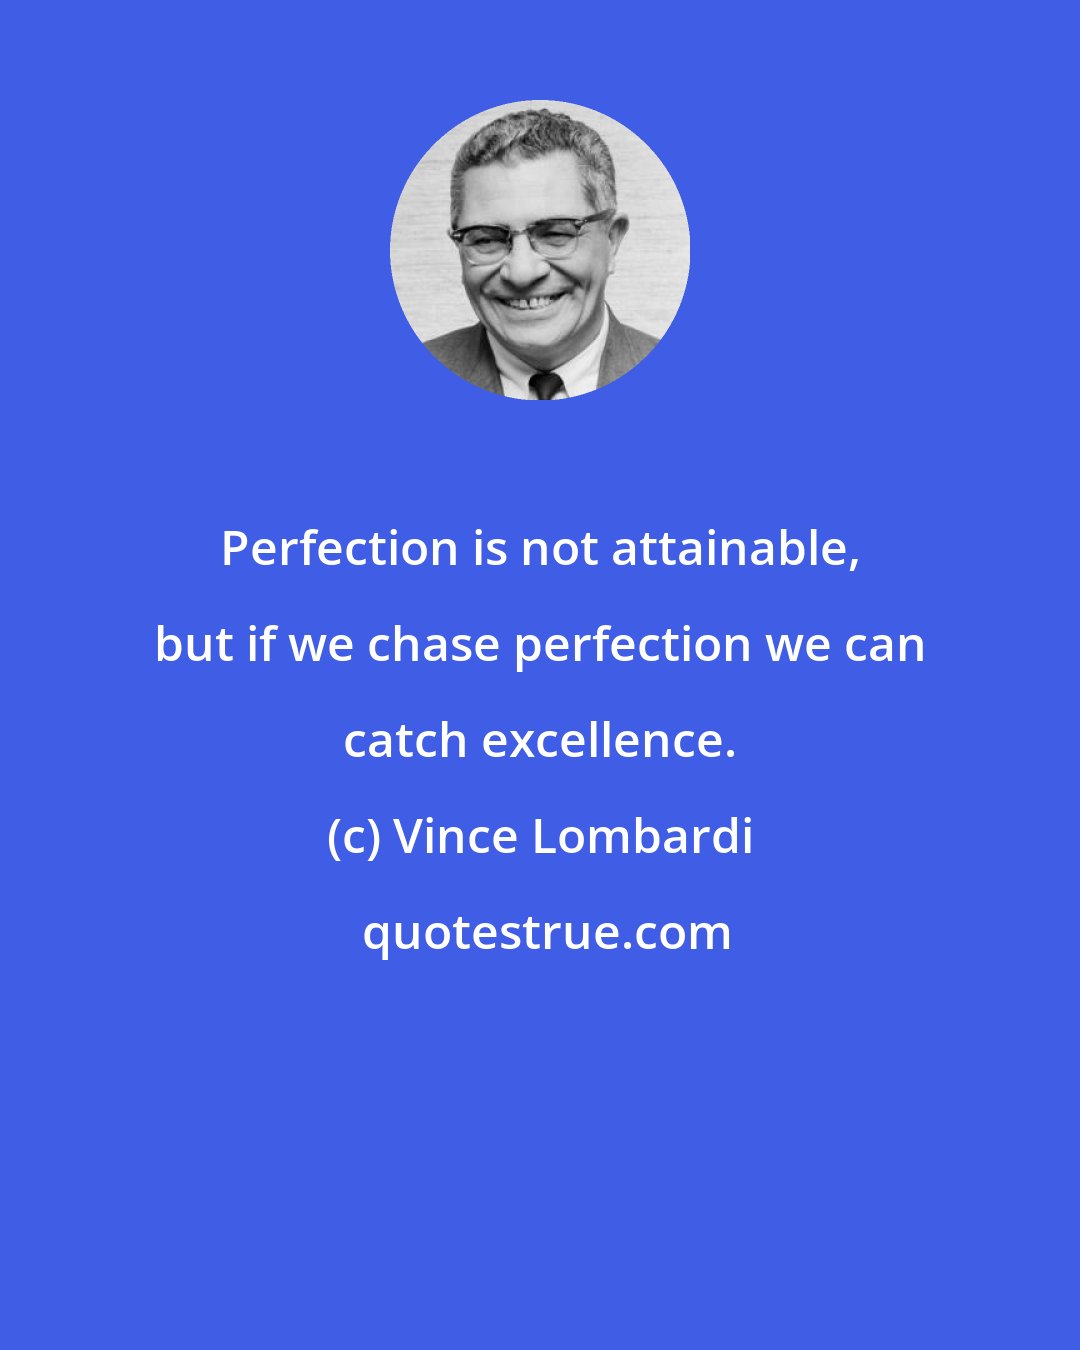 Vince Lombardi: Perfection is not attainable, but if we chase perfection we can catch excellence.